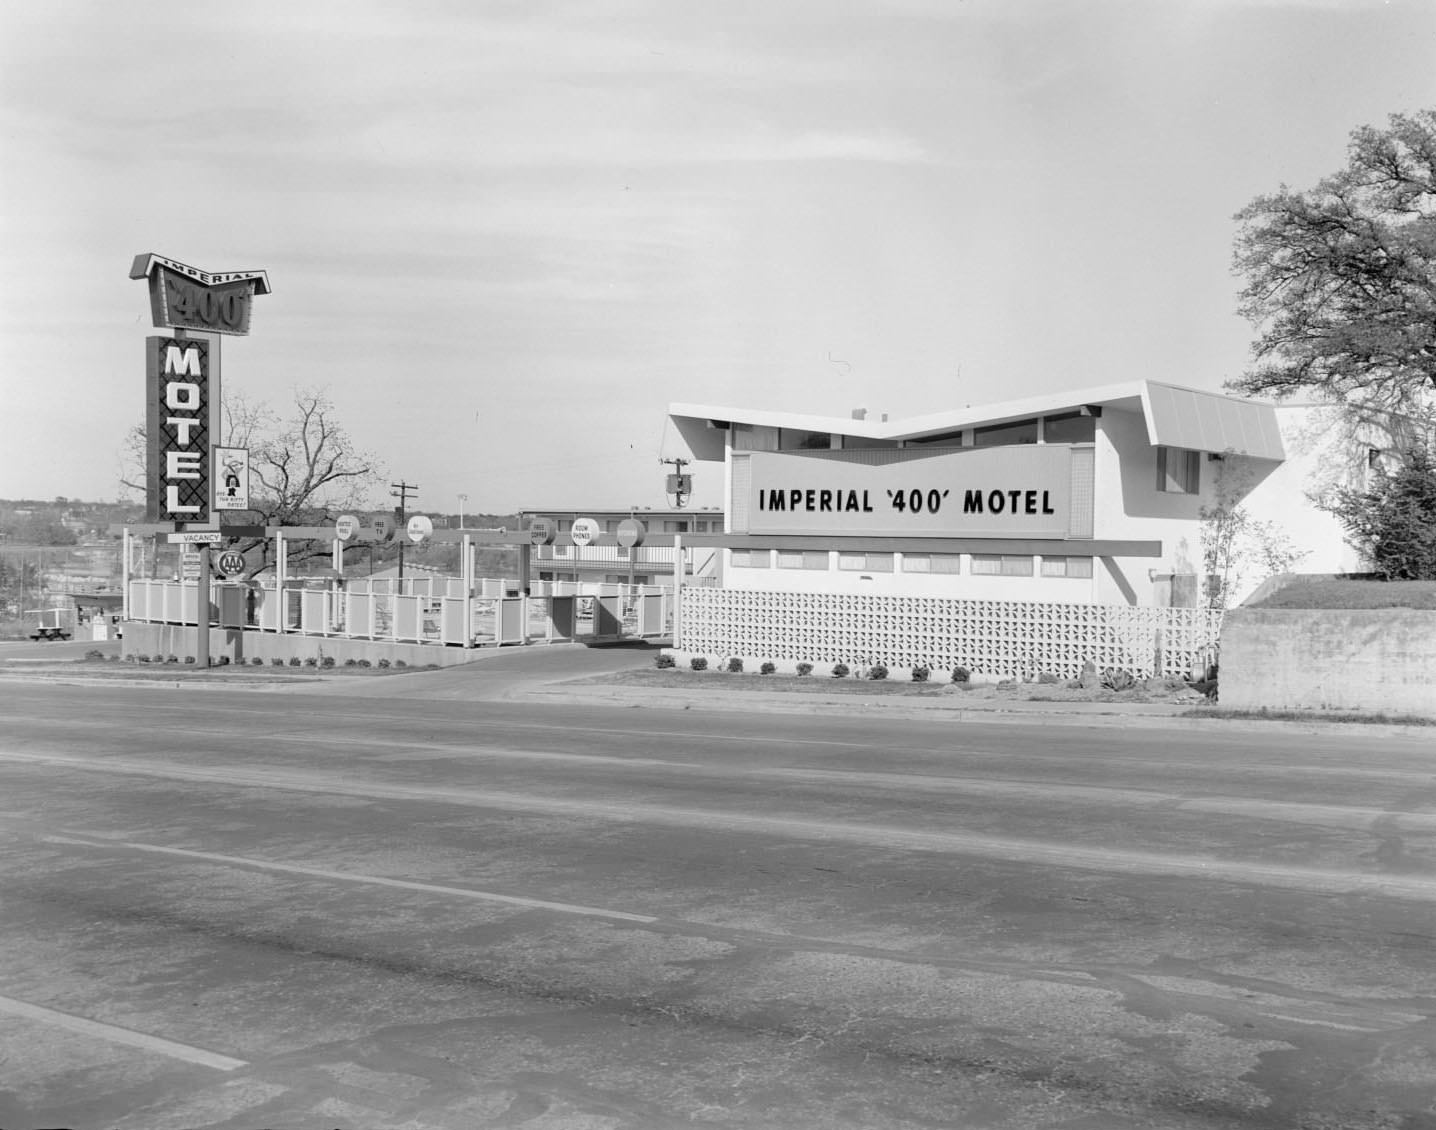 Imperial '400' Motel. Street in foreground is South Congress, Austin, 1961